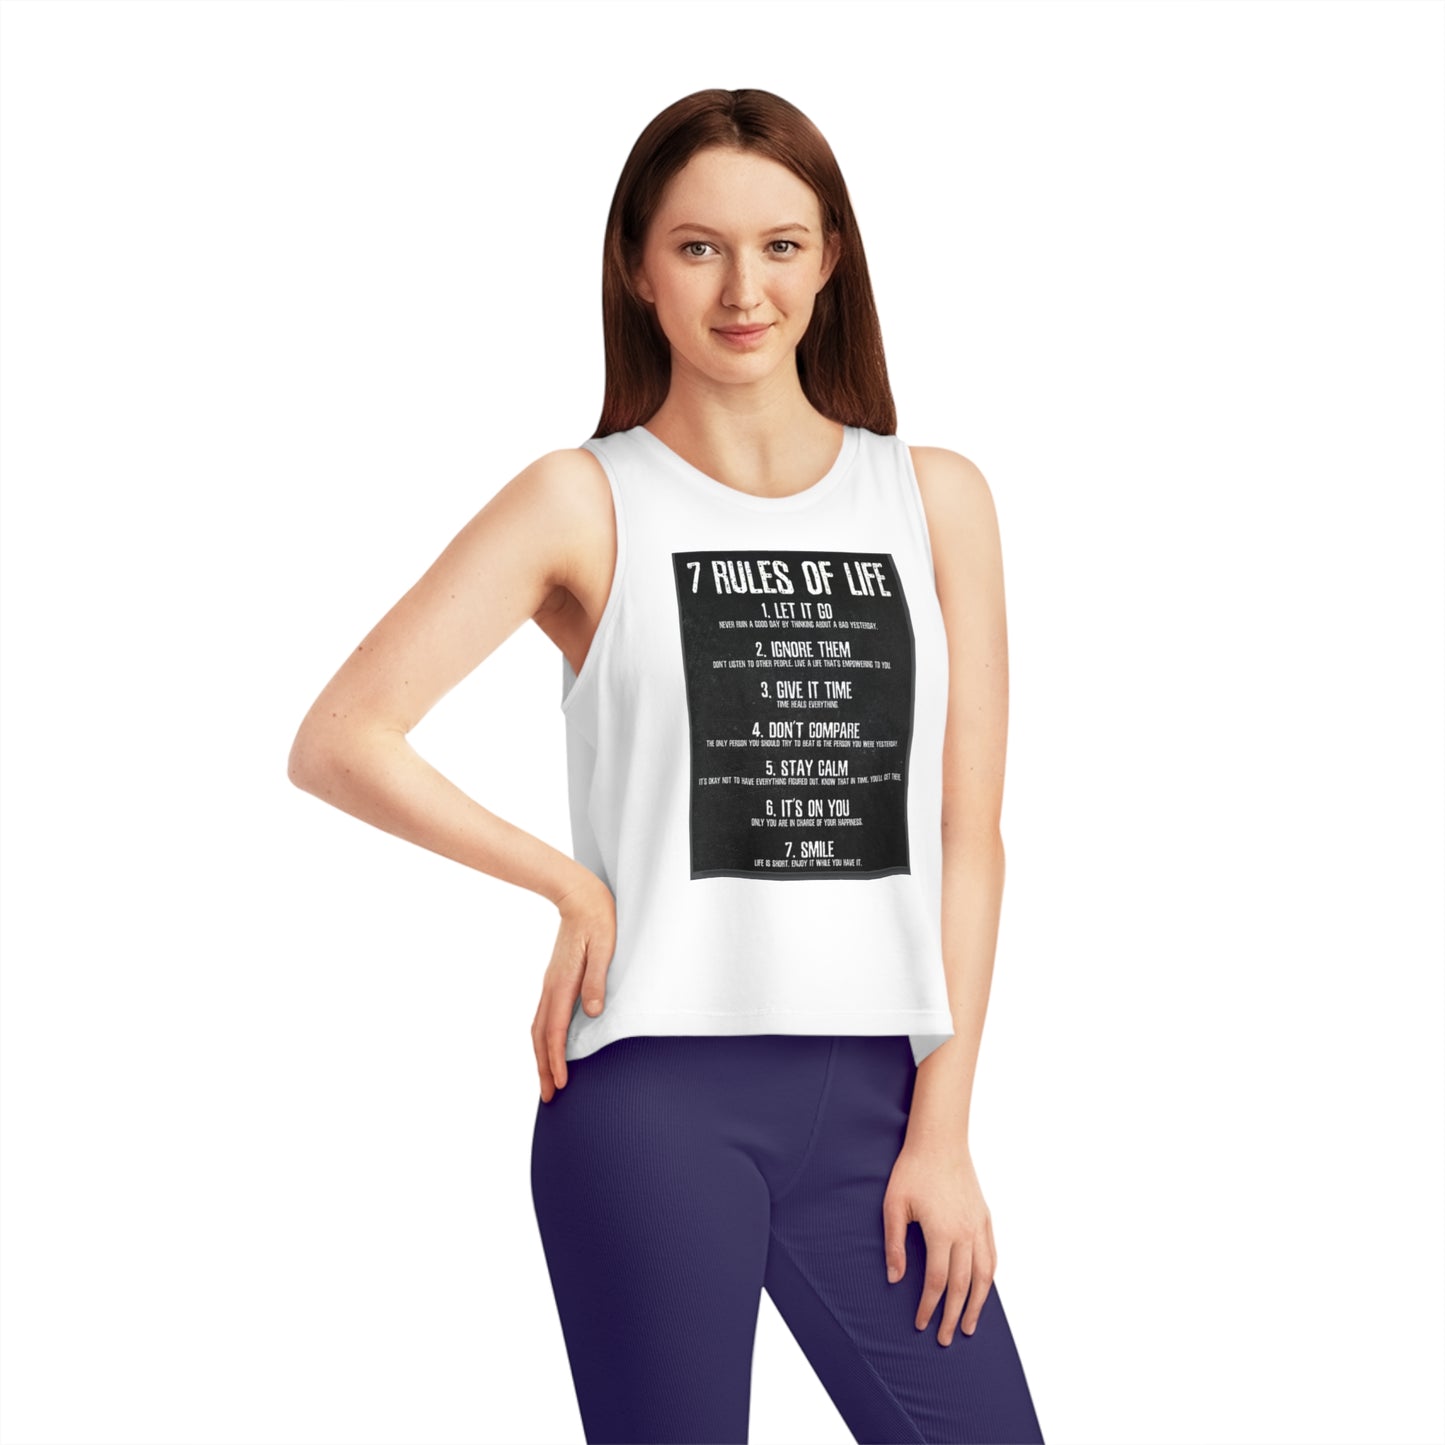 Women's 7 Rules of Life Dancer Cropped Tank Top*